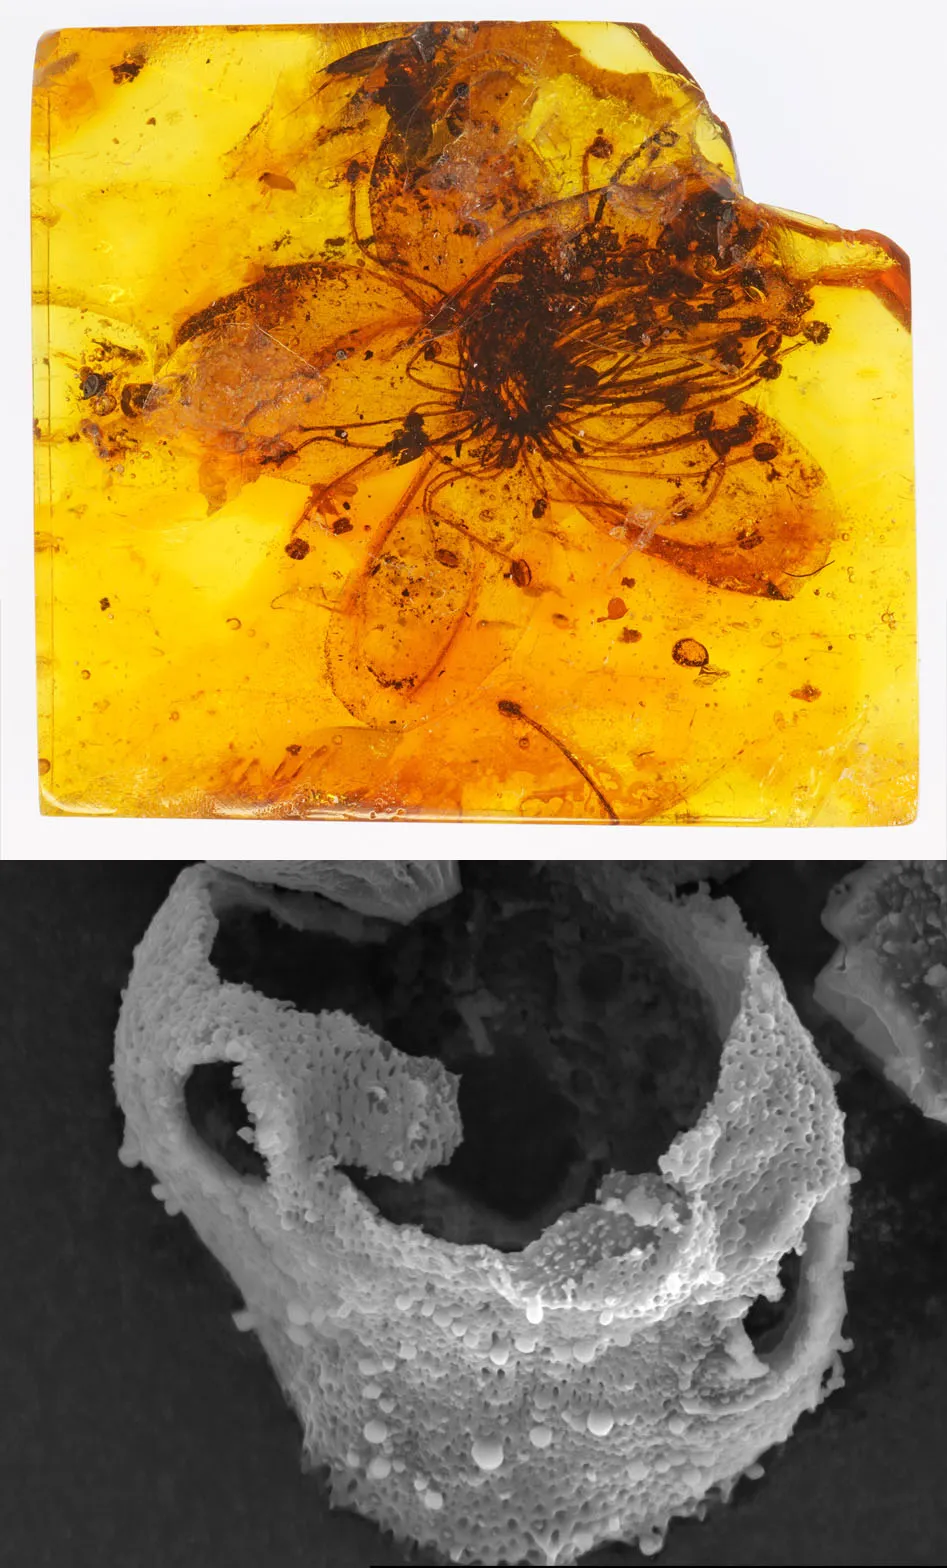 Amber flower and microscopic view of pollen